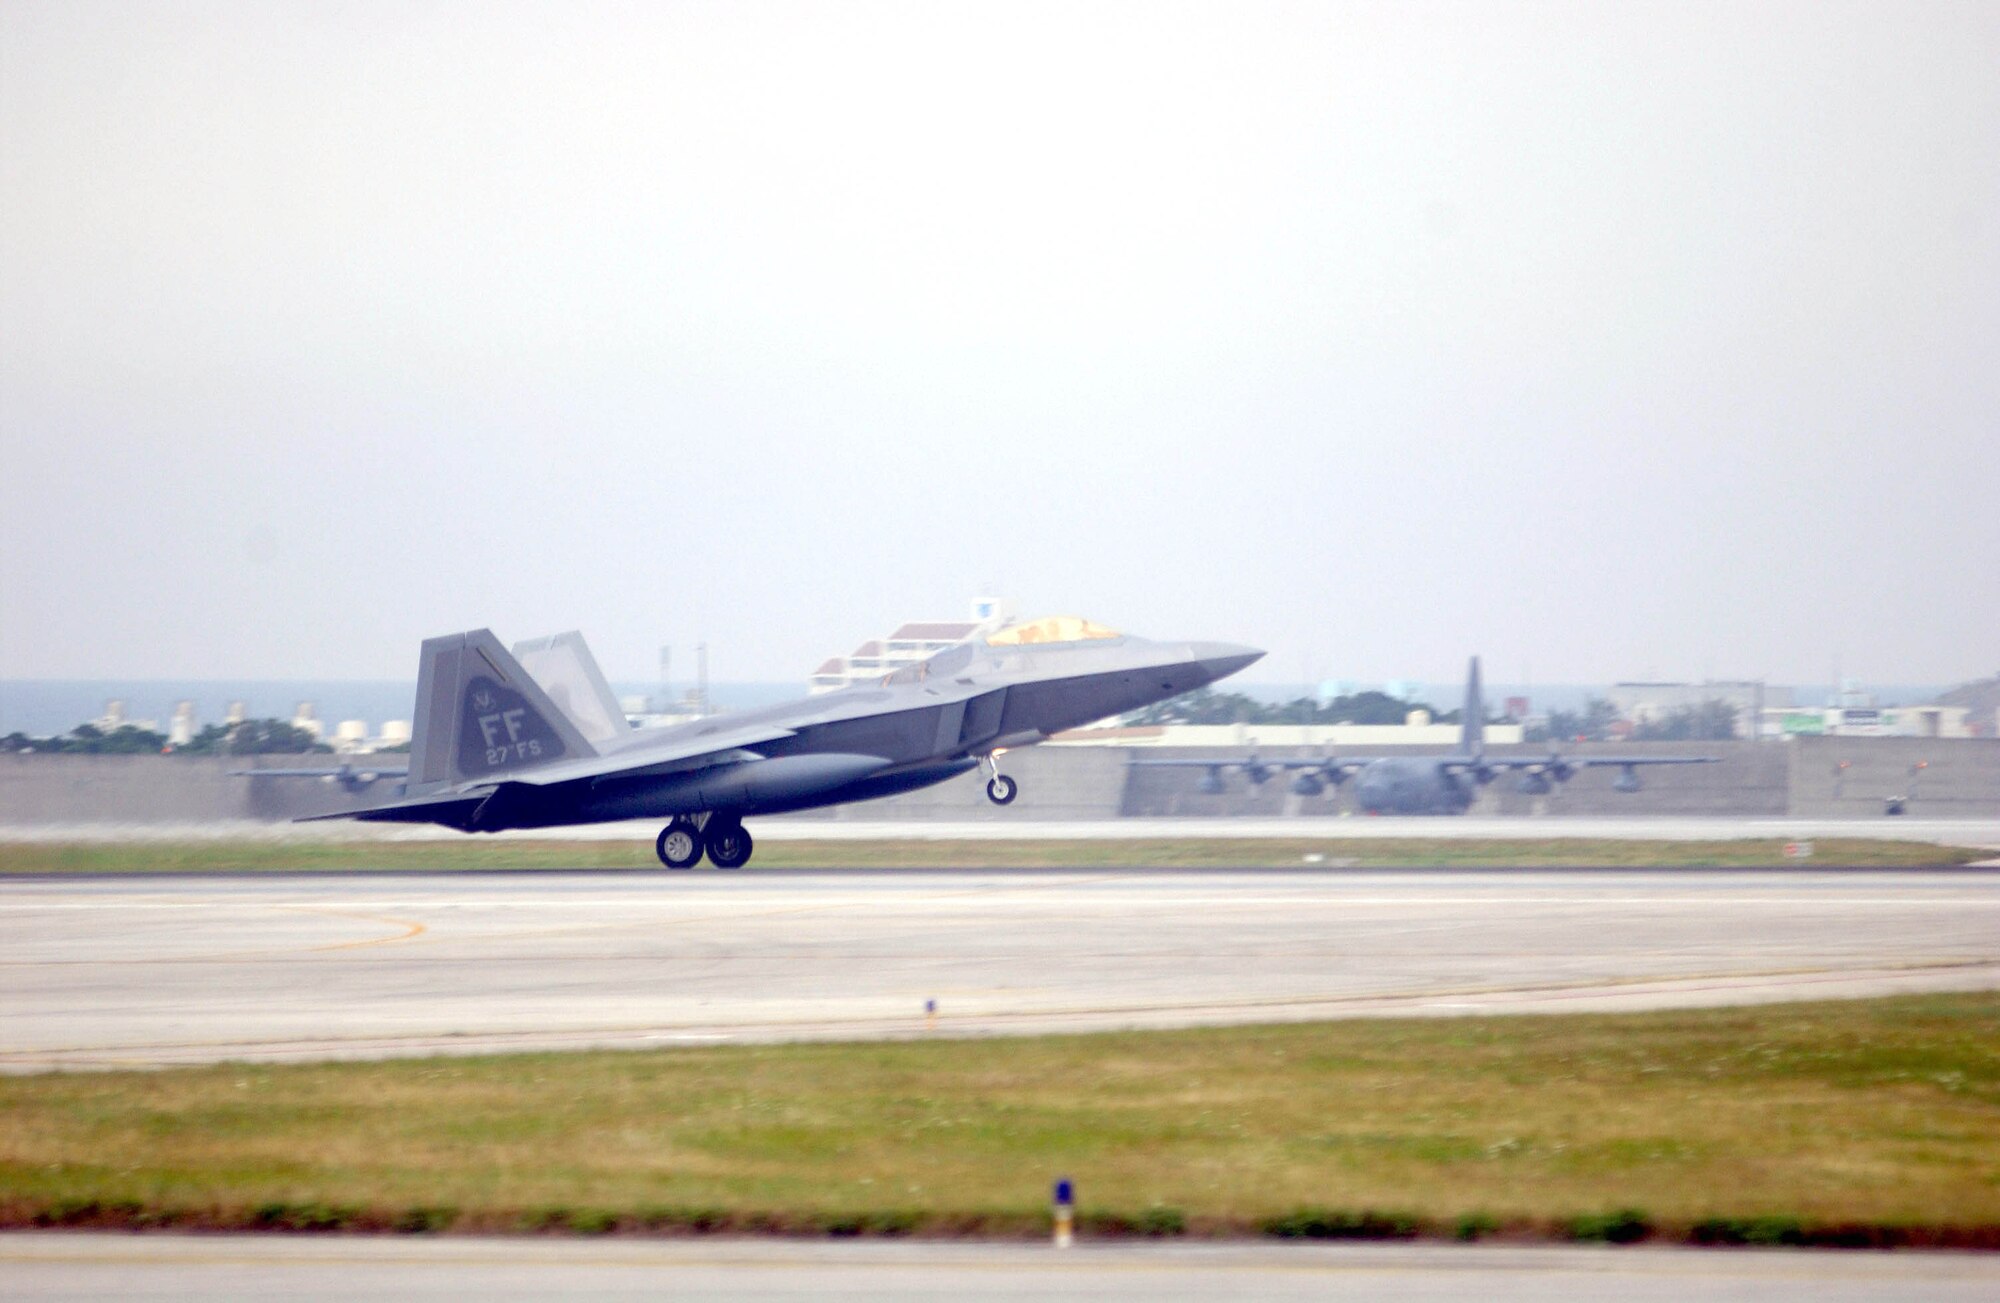 An F-22 Raptor lands at Kadena Air Base, Japan, Feb. 18, marking the aircraft's first overseas deployment. The jet is one of 12 along with more than 250 Airmen deployed from Langley Air Force Base, Va., to Kadena as part of an air expeditionary force rotation. (U.S. Air Force photo/Airman 1st Class Ryan Ivacic) 